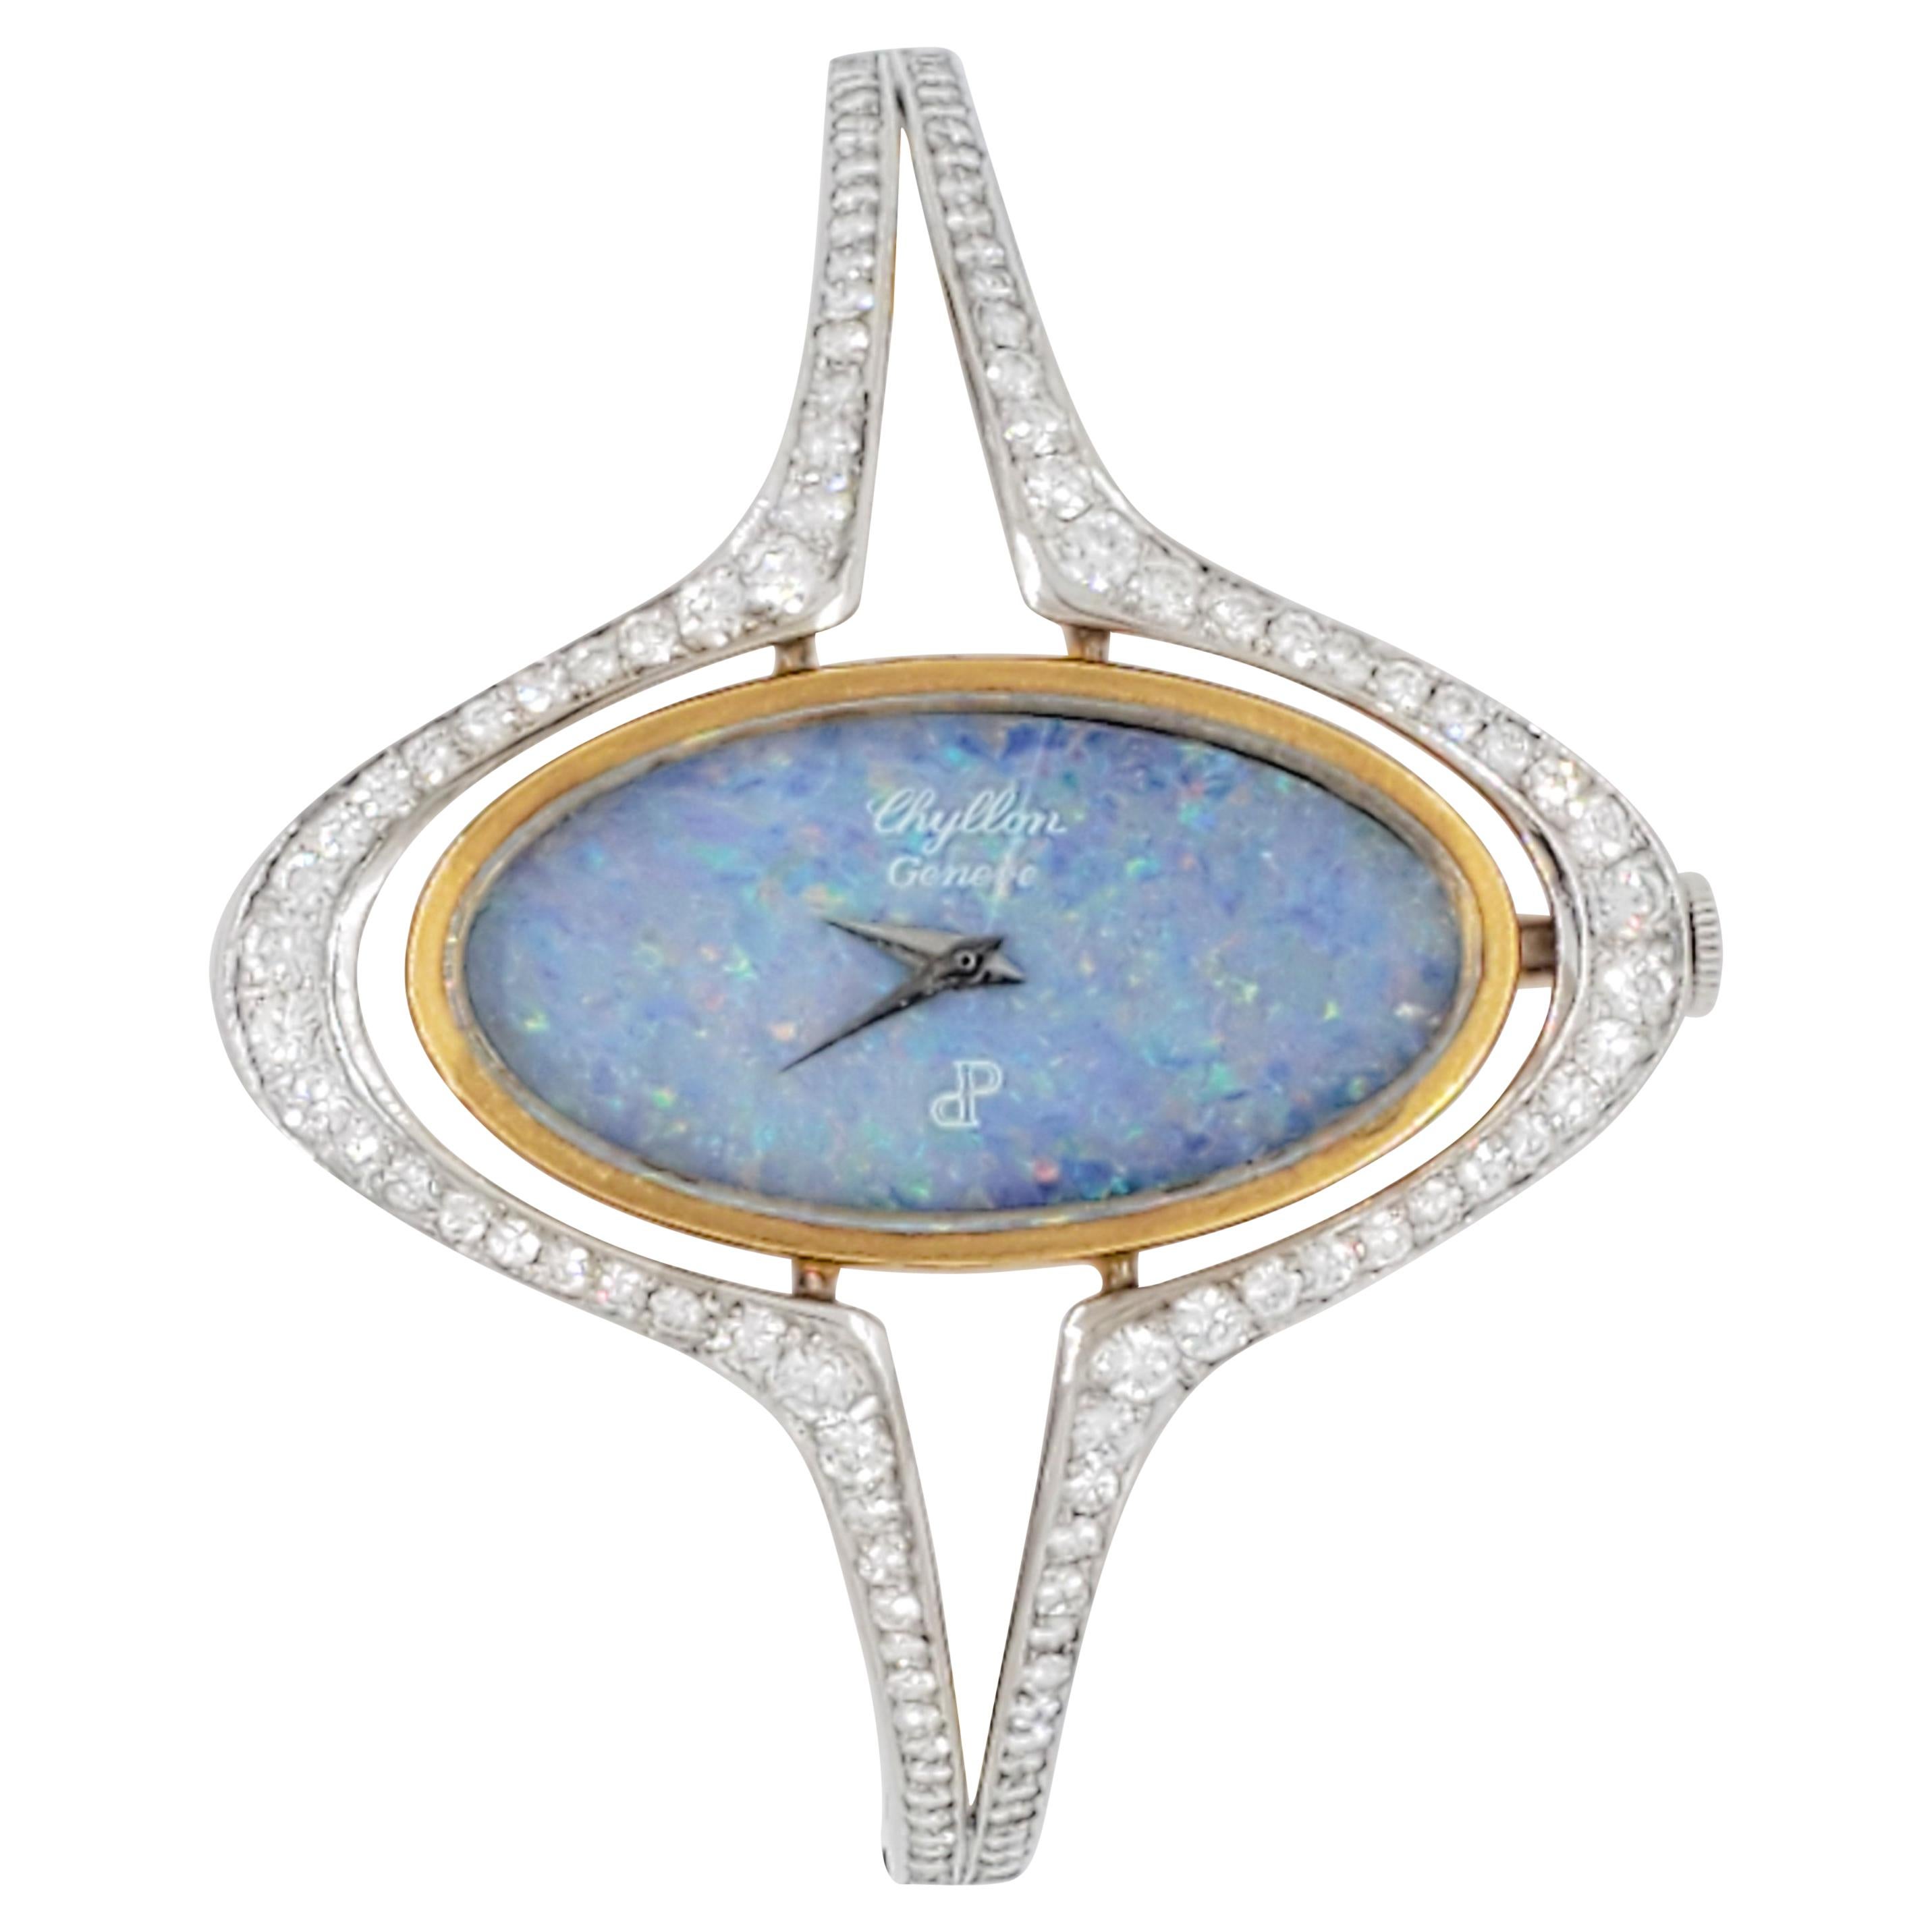 Estate Chyllon Geneve Opal and White Diamond Bangle Watch in 18k Two Tone Gold